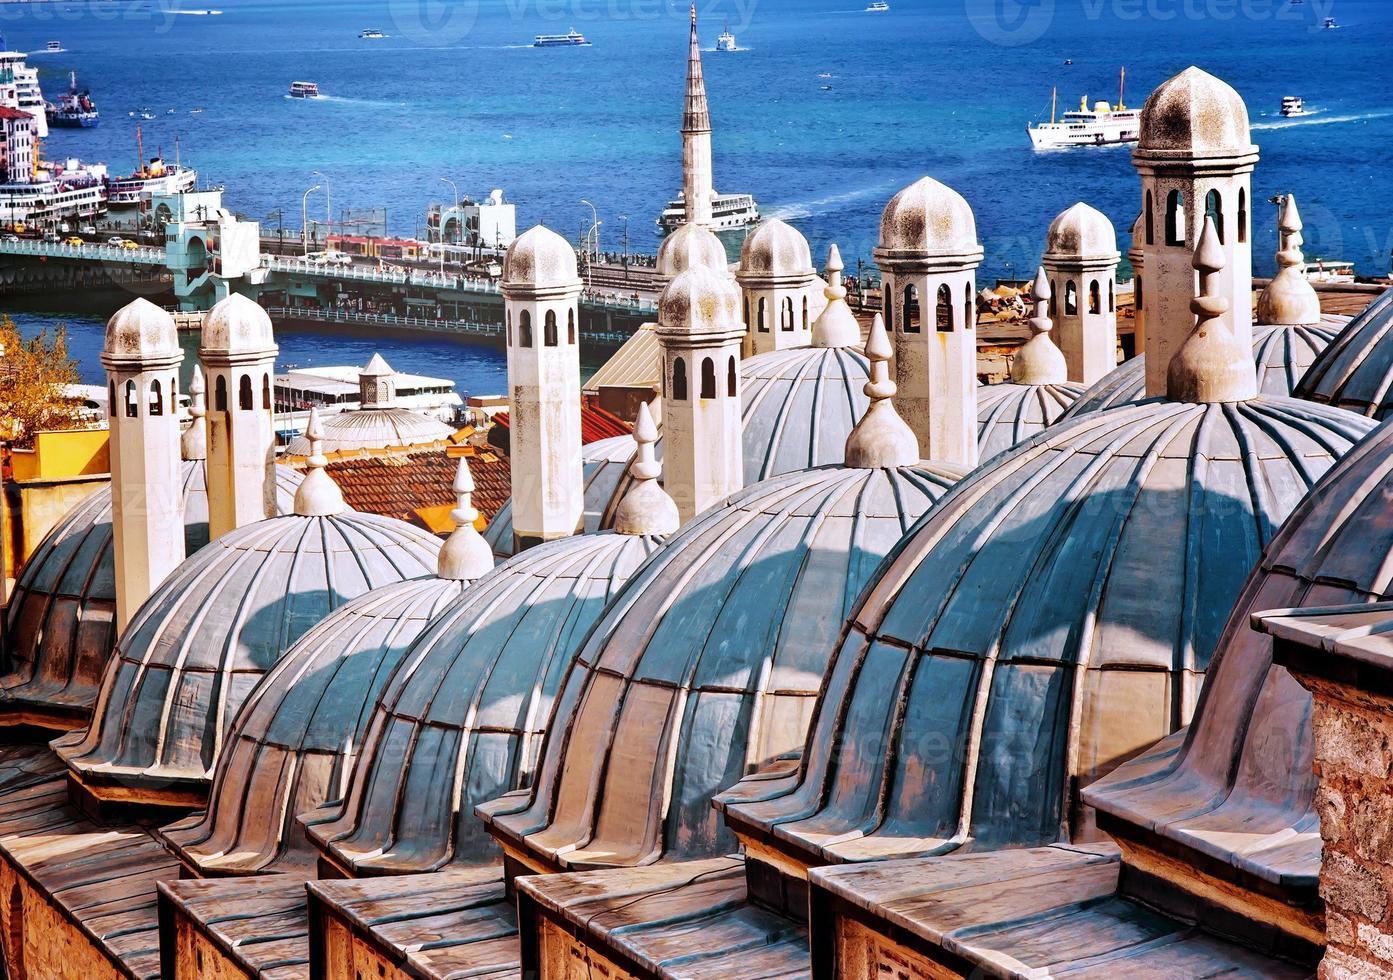 Roofs of the bath behind Suleymaniye Mosque. Istanbul photo